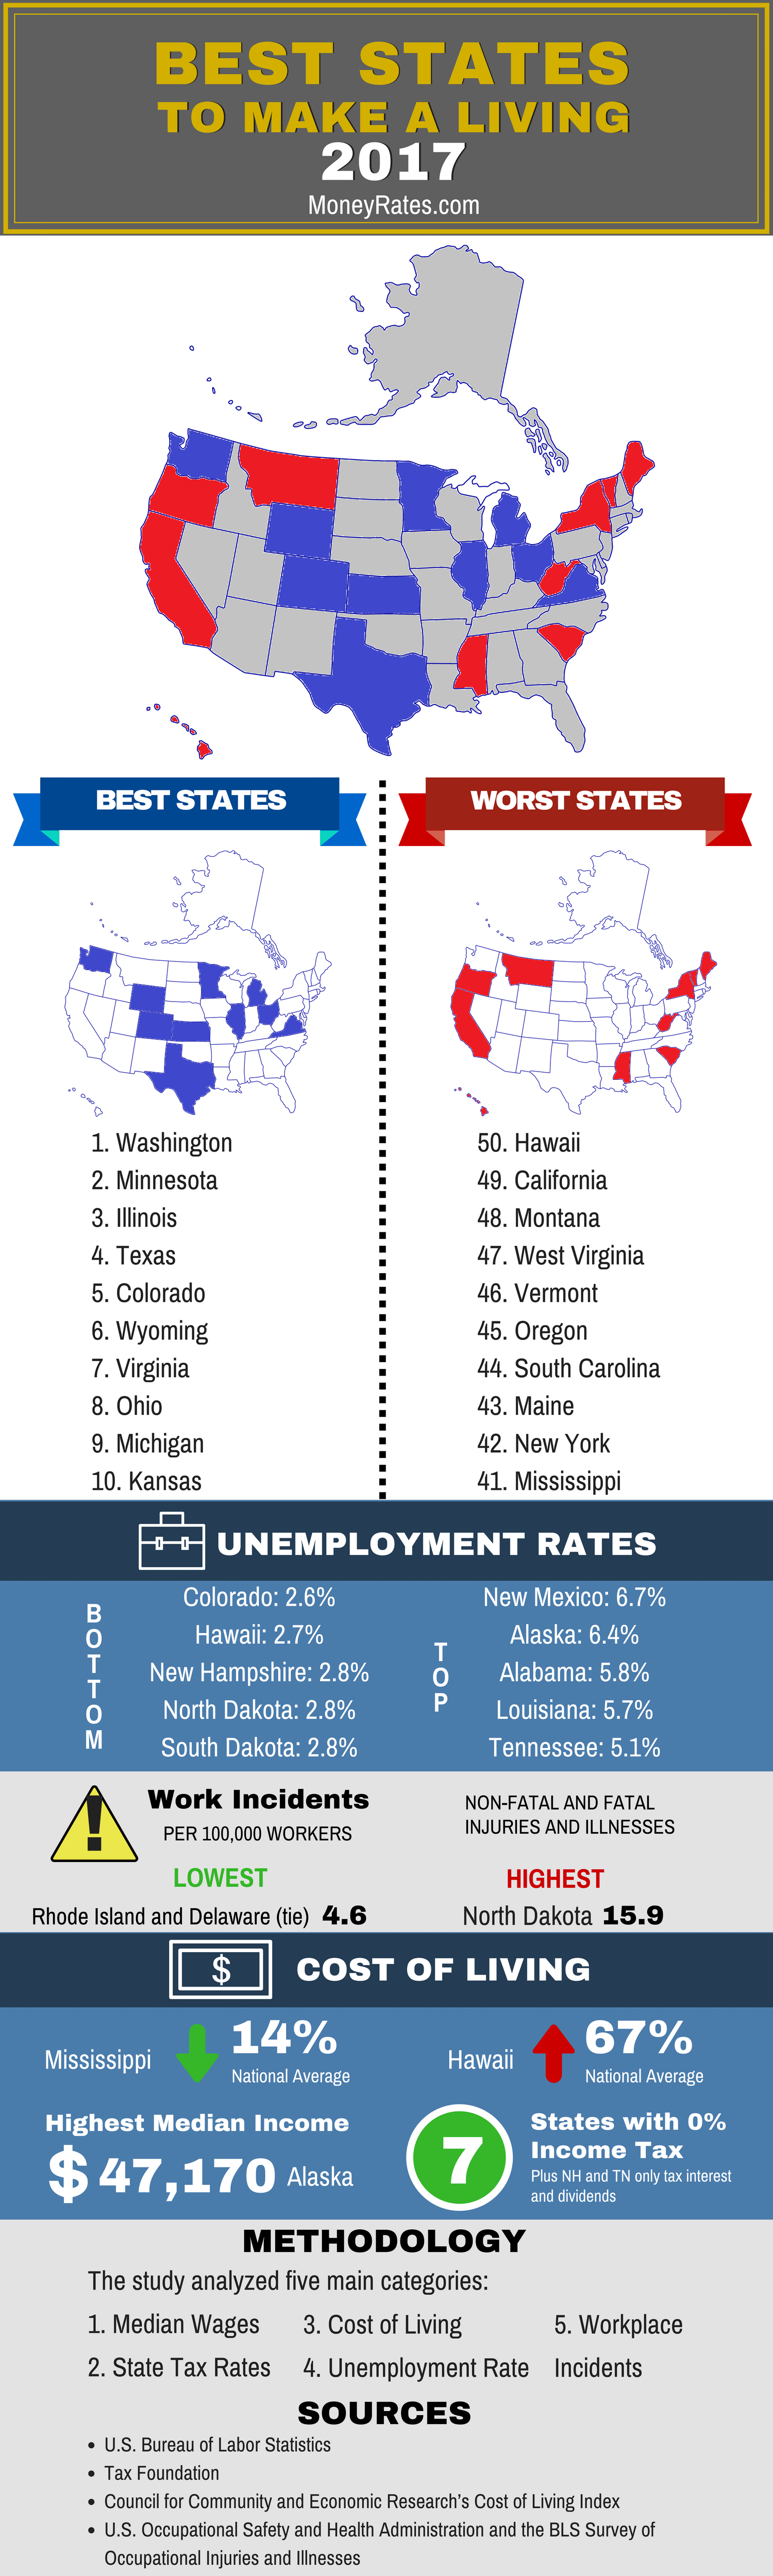 Best and Worst States to Make a Living 2017 Infographic